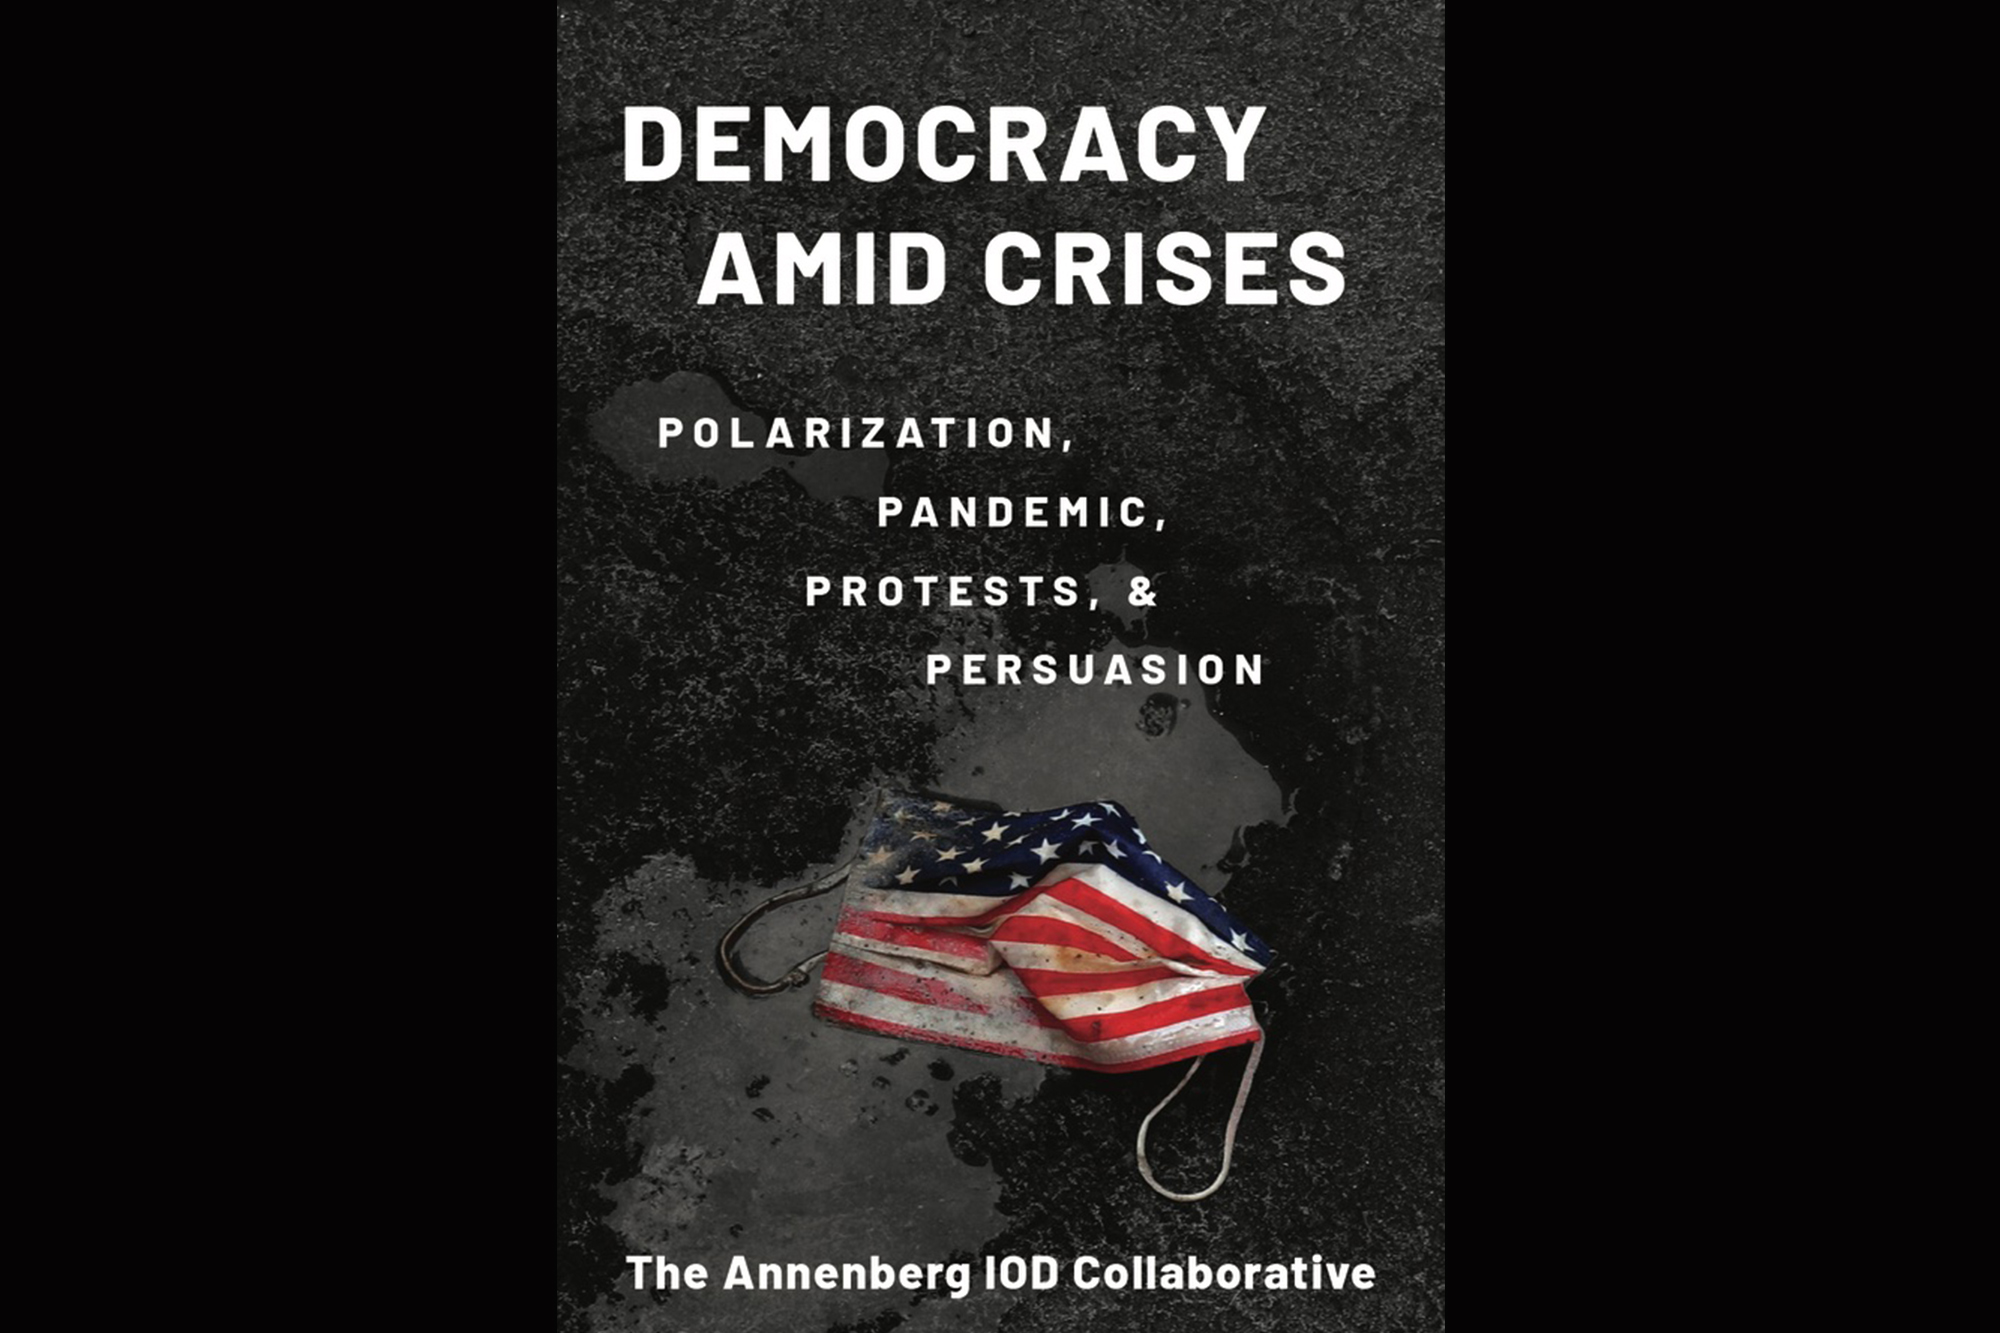 Jacket of book by Kathleen Hall Jamieson and Matthew Levendusky called Democracy Amid Crises: Polarization, Pandemic, Protests and Persusaion